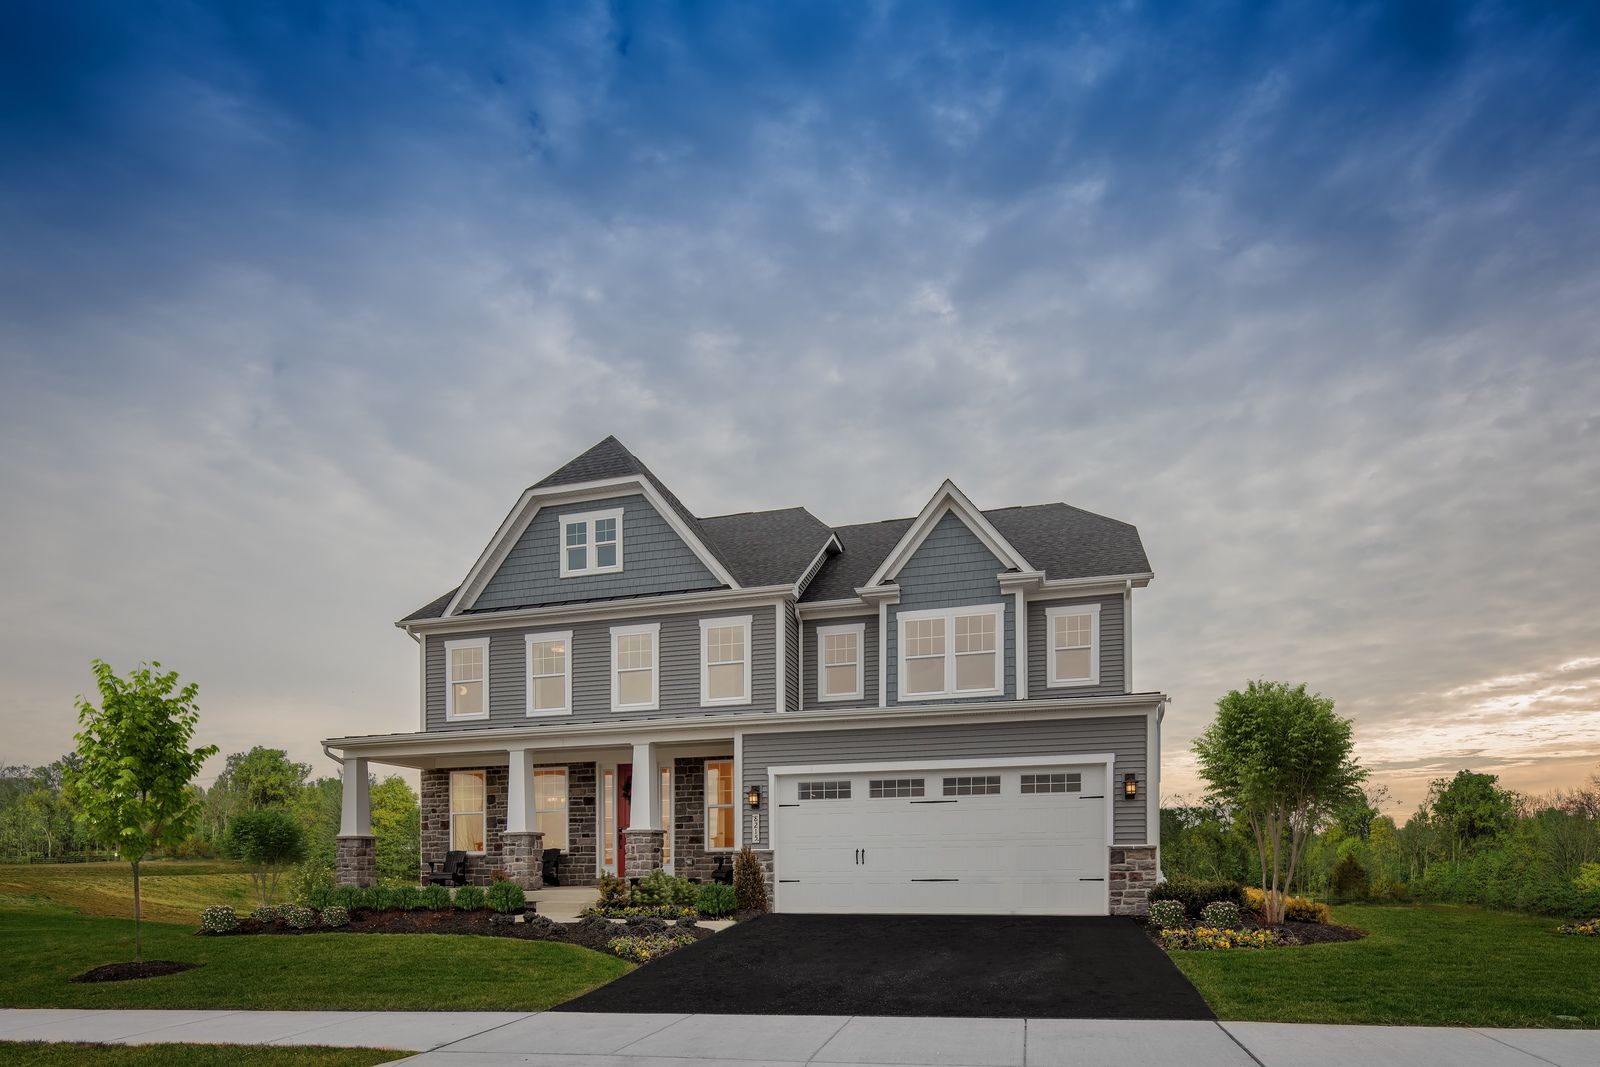 JUST ONE HOMESITE REMAINs AT CHALFONT VIEW - HURRY IN!